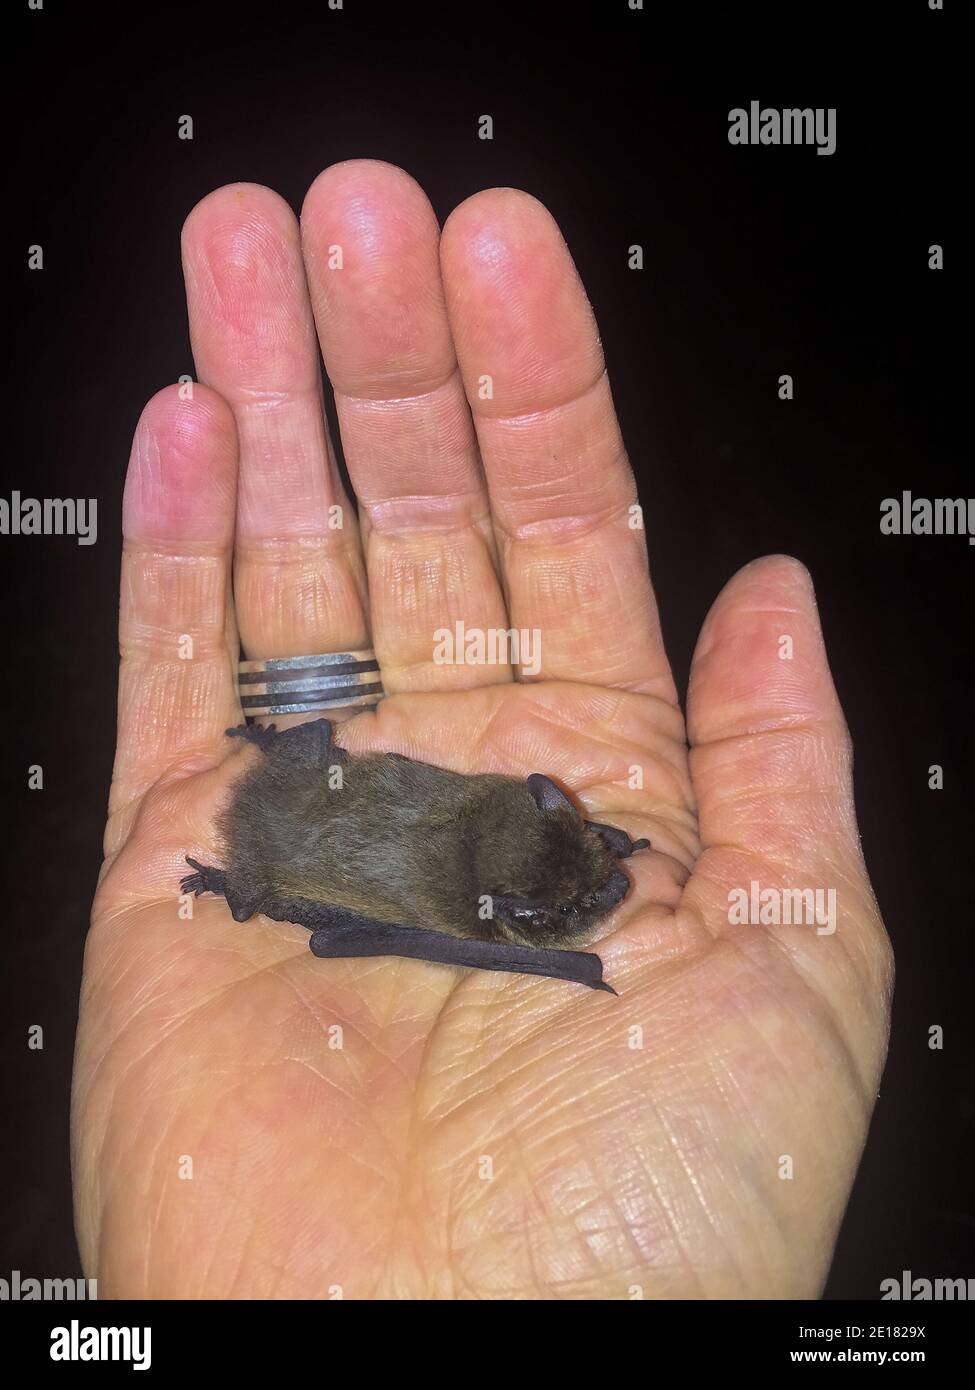 Common Pipistrelle Bat (Pipistrellus pipistrellus) in the hands of biologist, Baden-Wuerttemberg, Germany Stock Photo